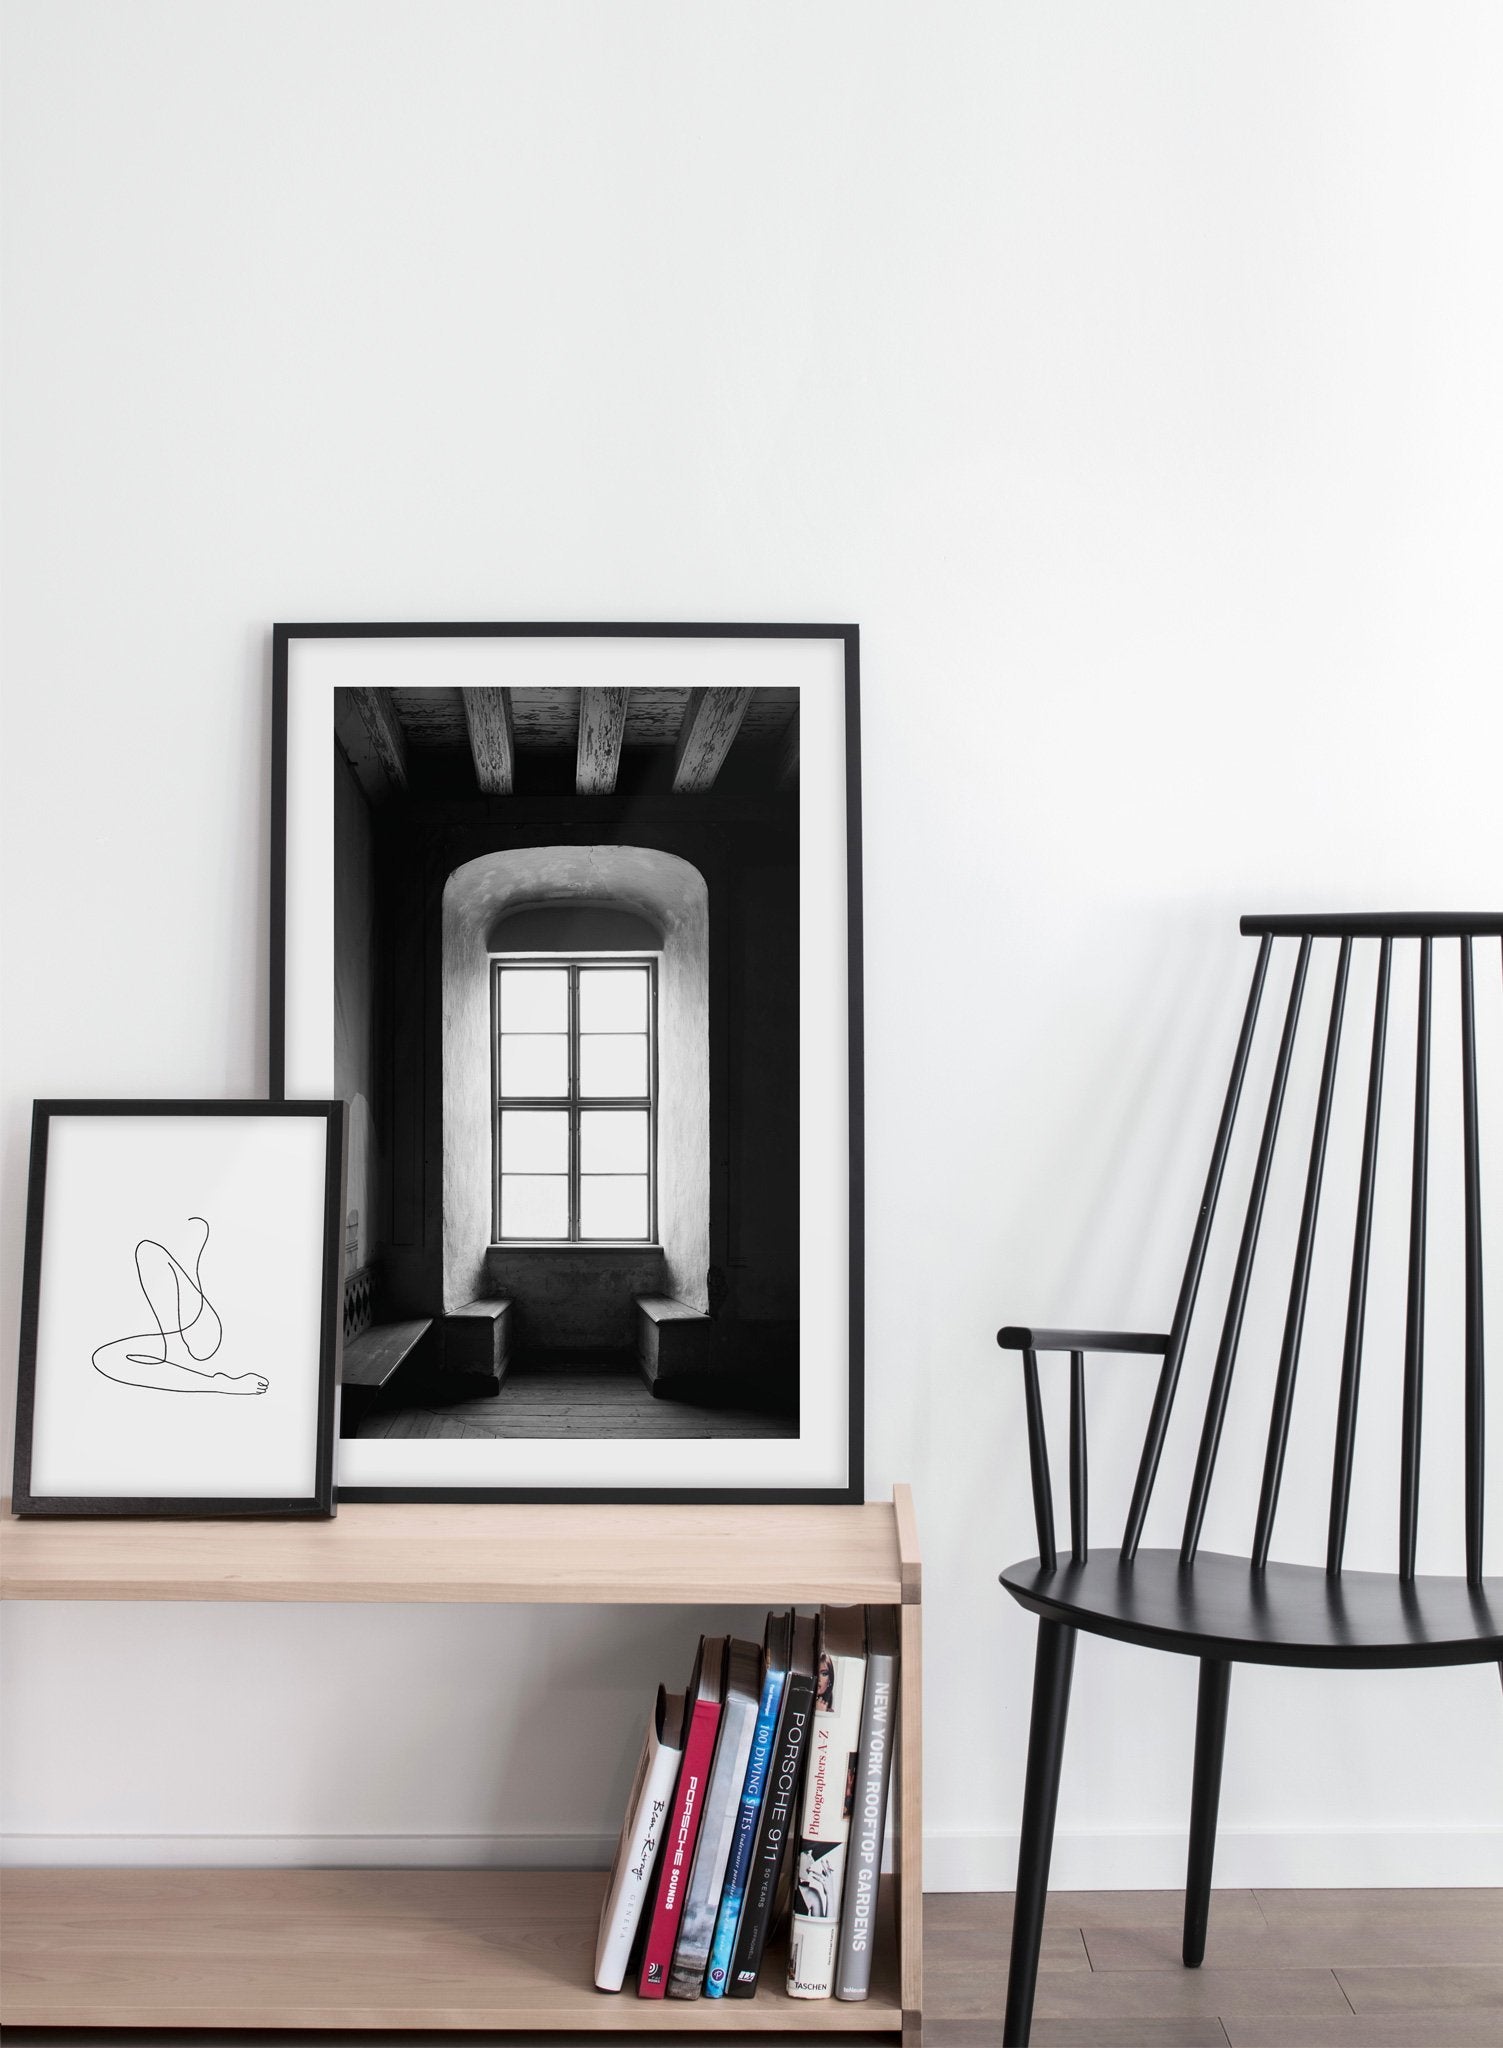 Alcove modern minimalist black and white photography poster by Opposite Wall - Bedroom